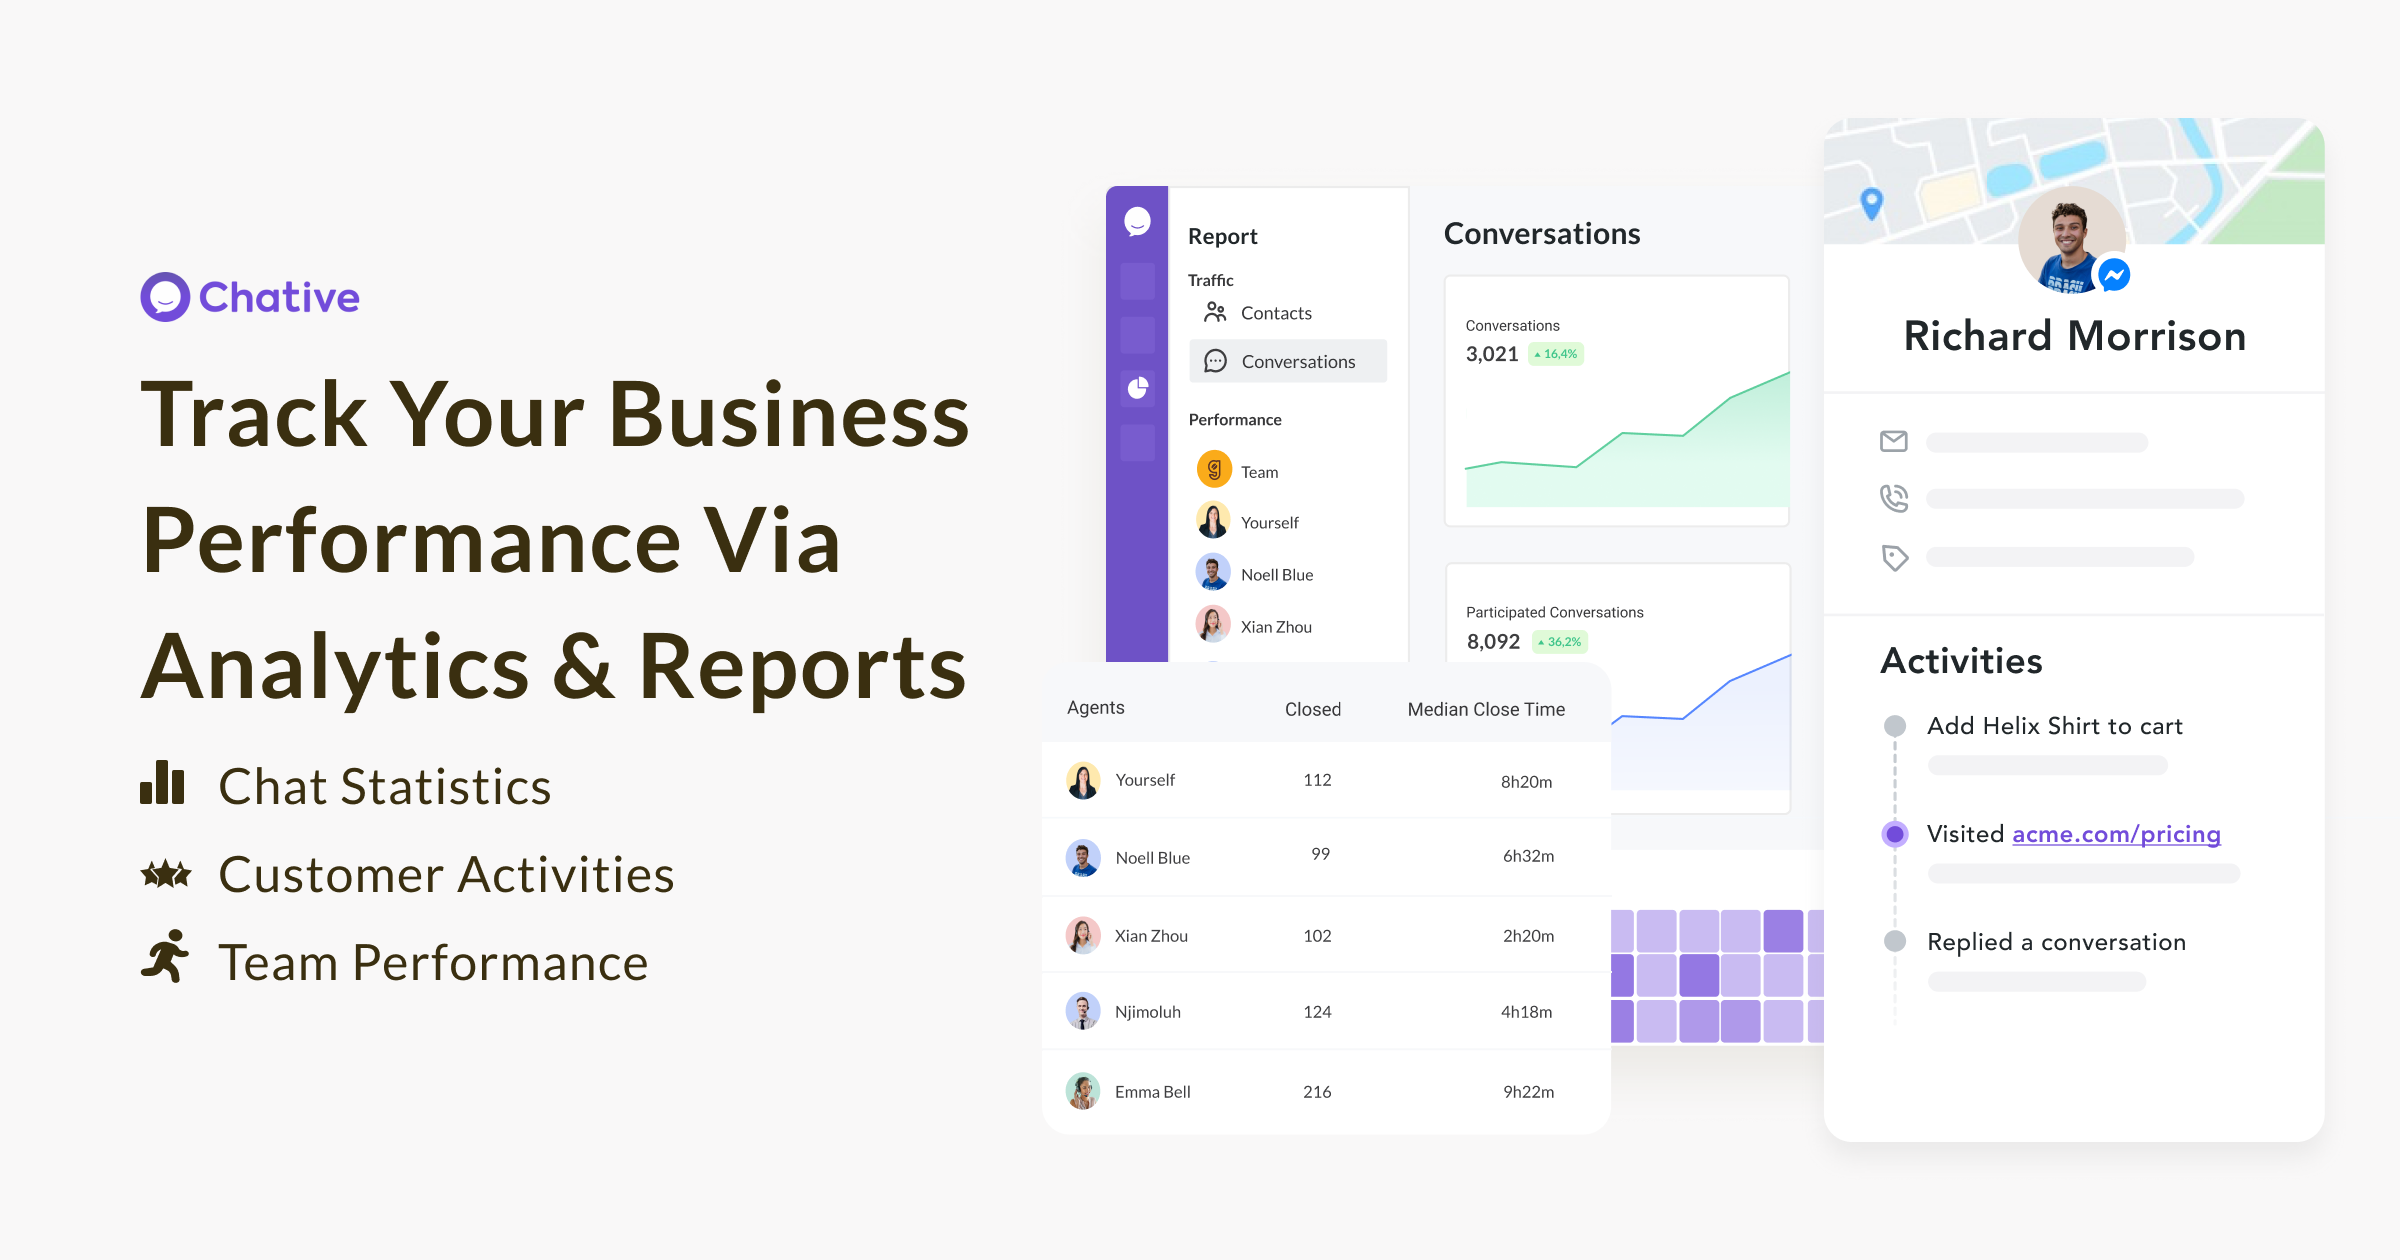 With Chative Analytics and Reports, you can leverage insights from analytics and reports to make data-driven decisions, improve customer support, and optimize your business strategies.